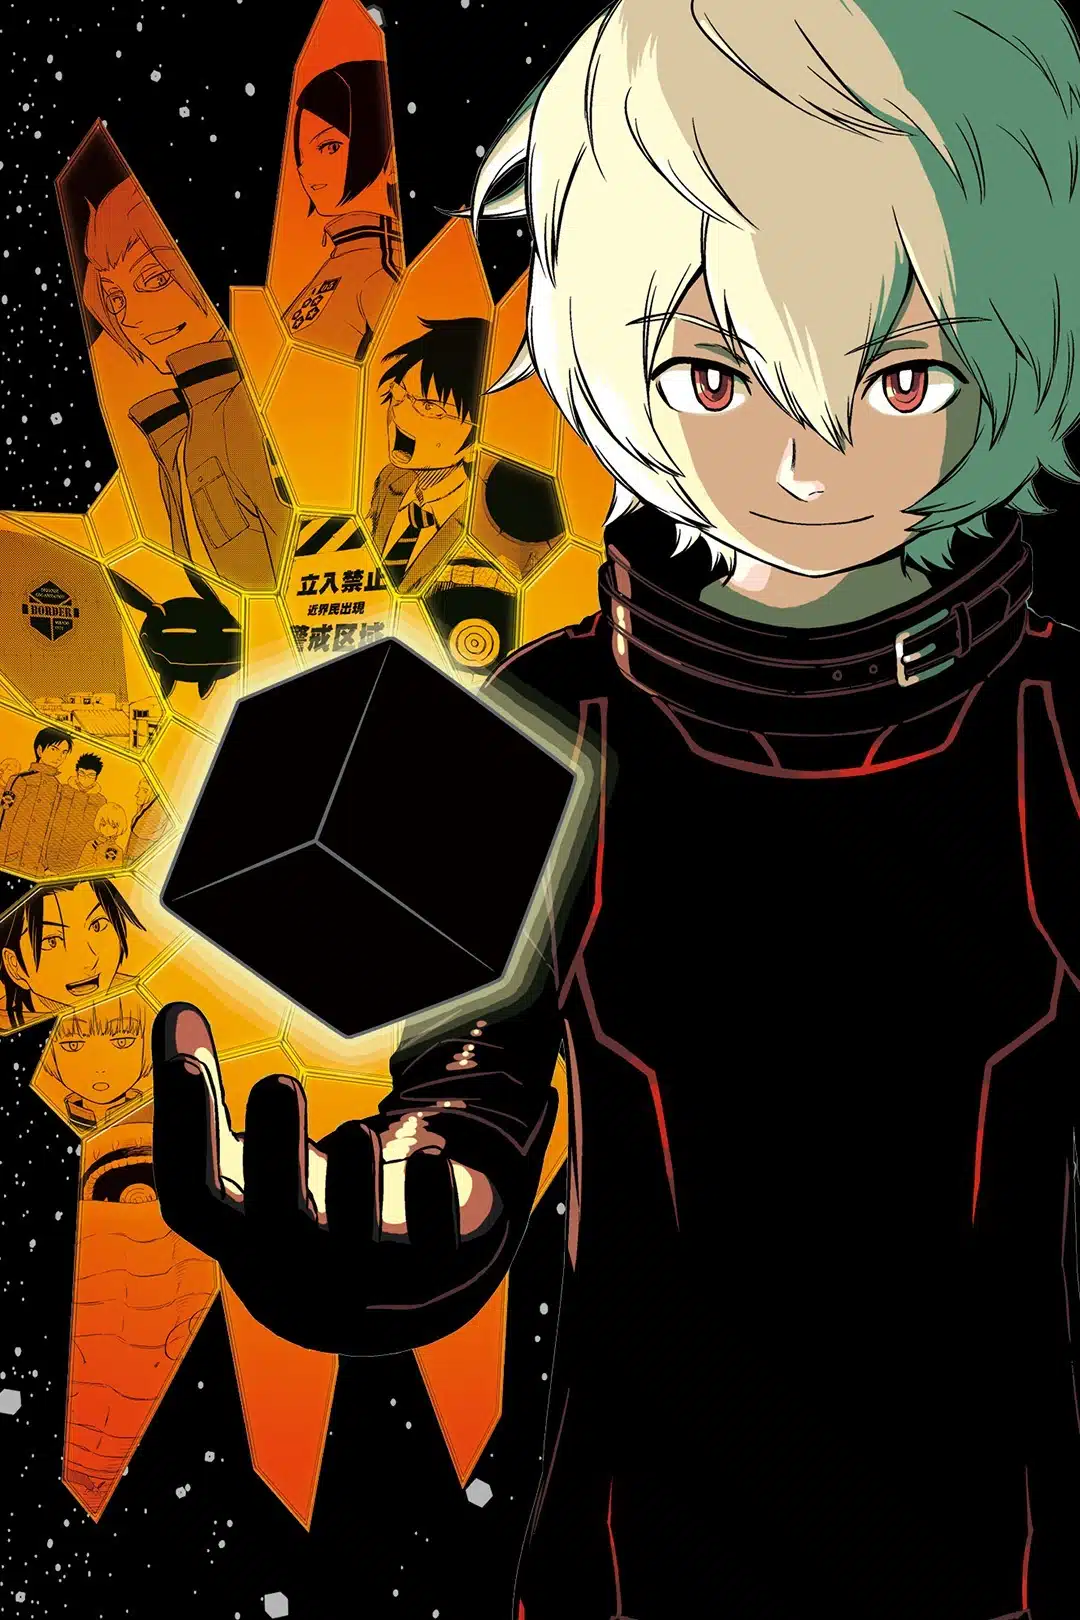 World Trigger Season 4: Renewal, Release Date & Everything We Know